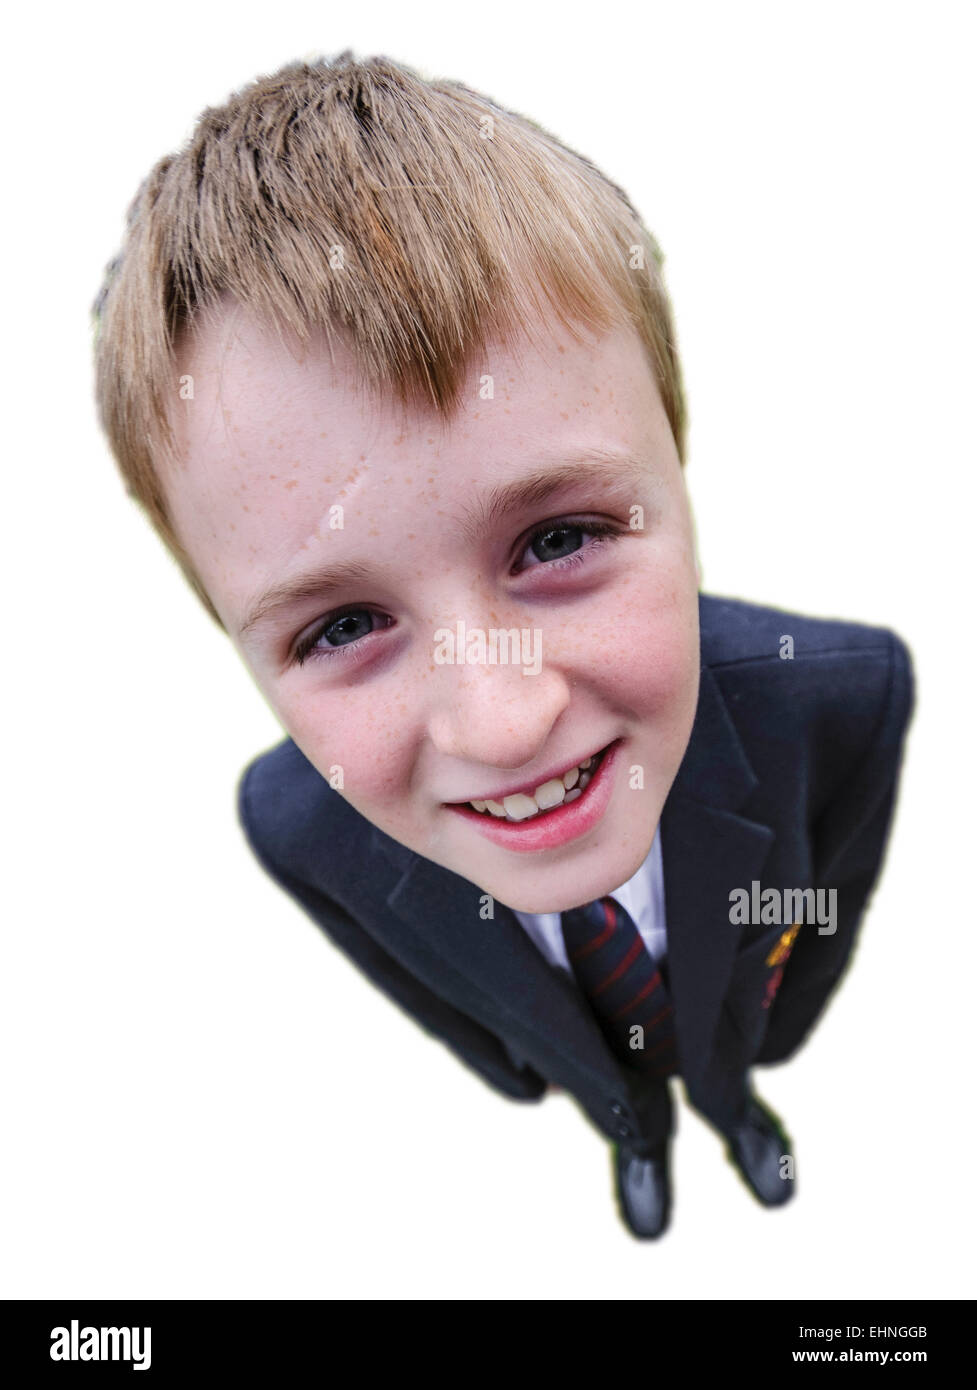 Distorted image of a schoolboy Stock Photo